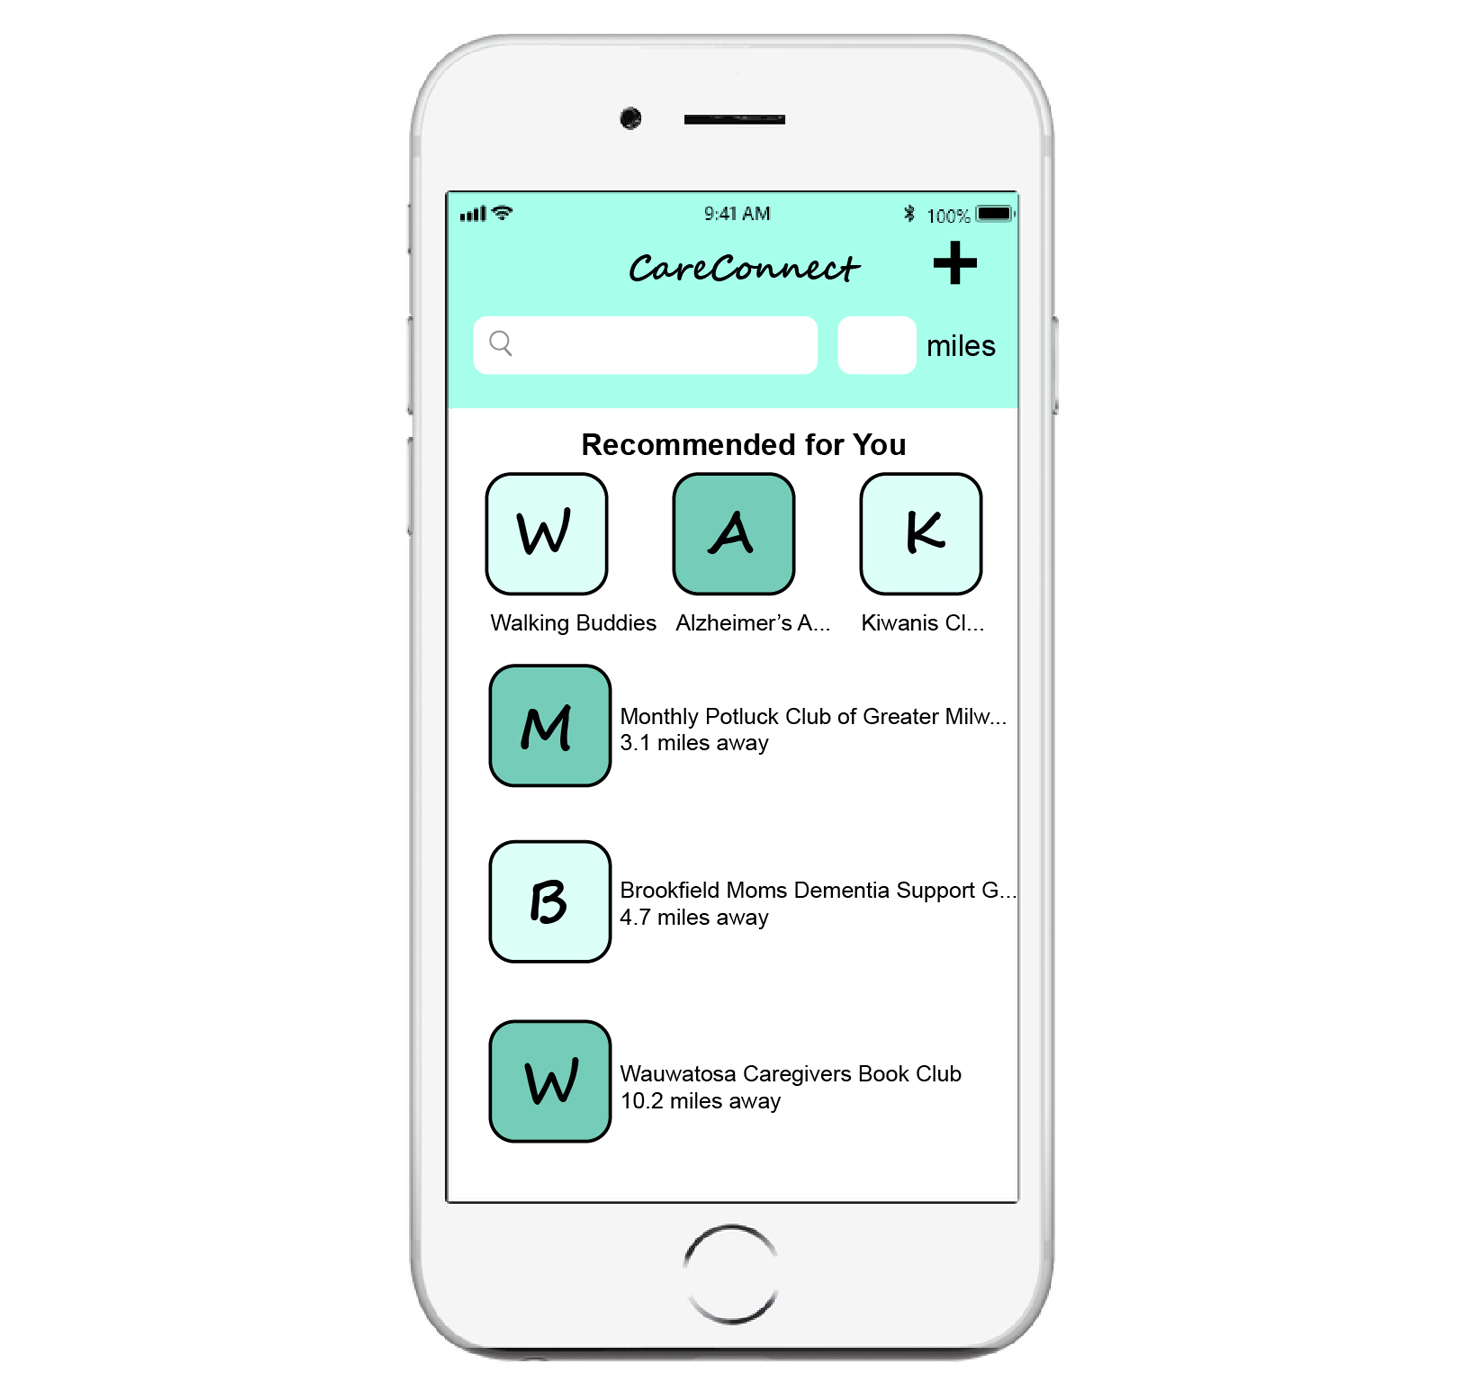 Careconnect phone screens